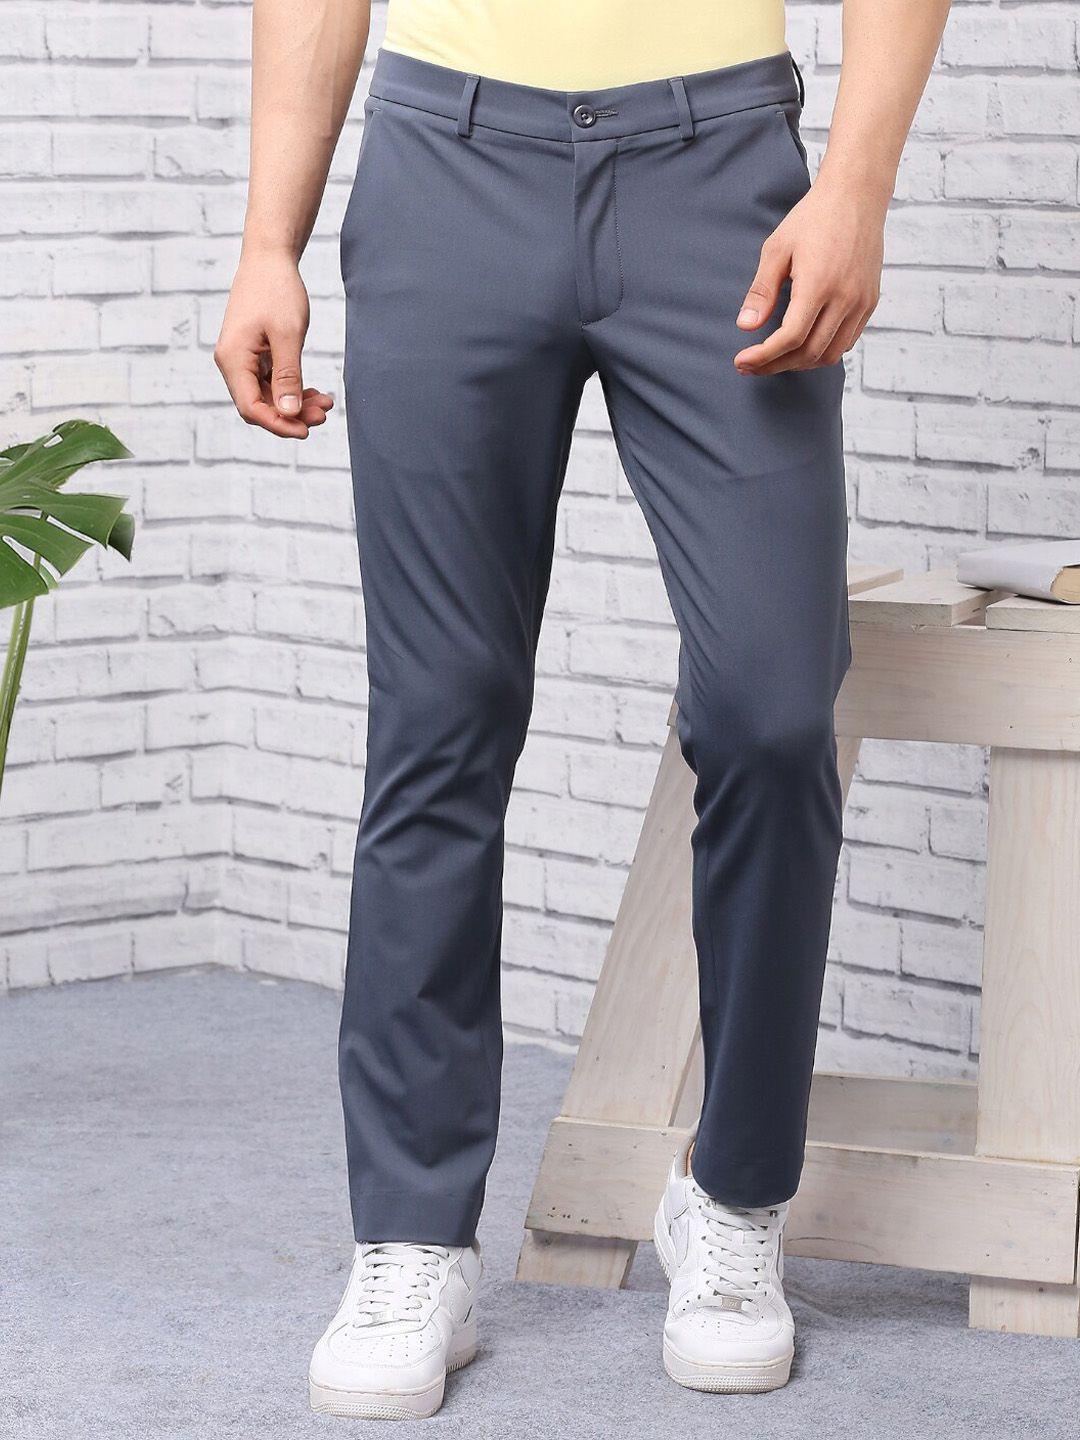 onemile men grey smart slim fit chinos trousers